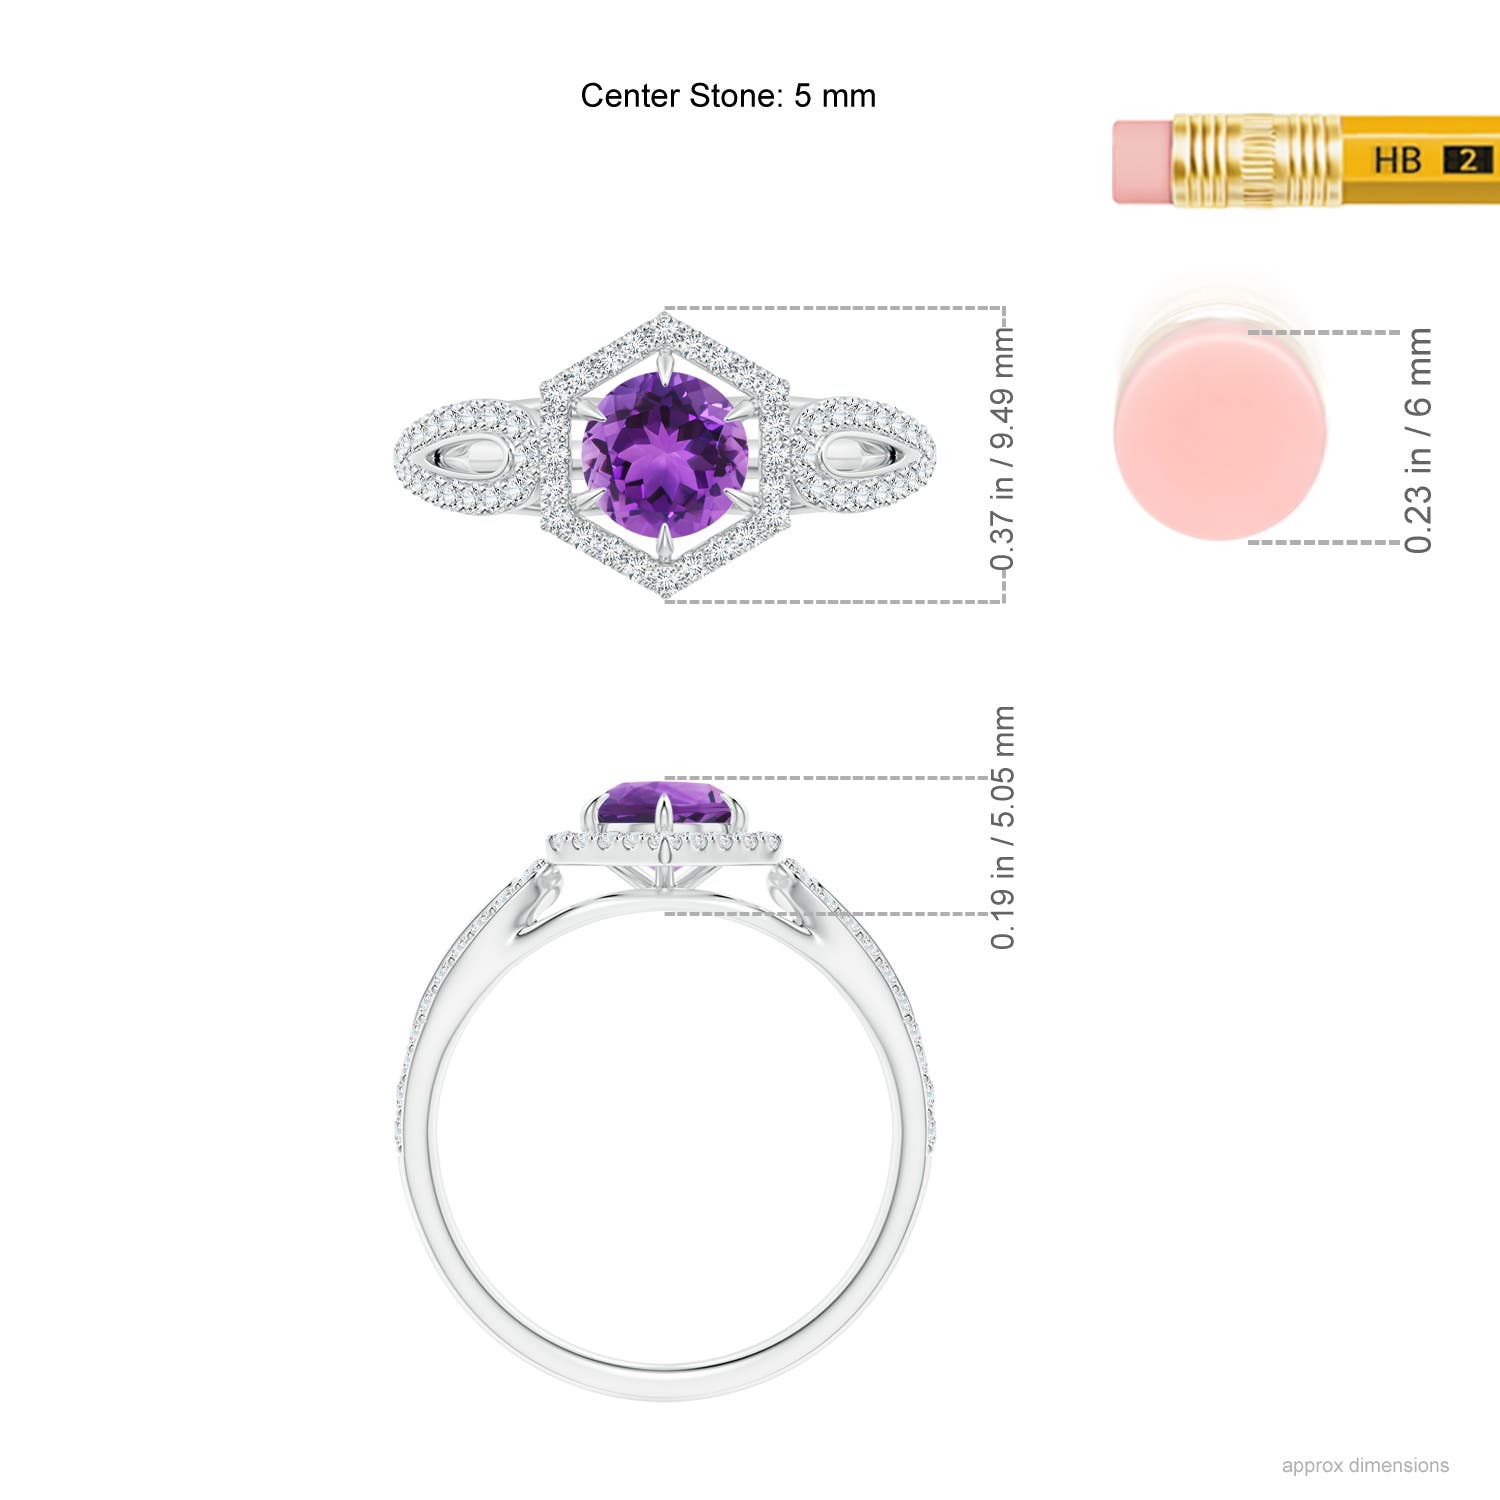 AAA - Amethyst / 0.78 CT / 14 KT White Gold